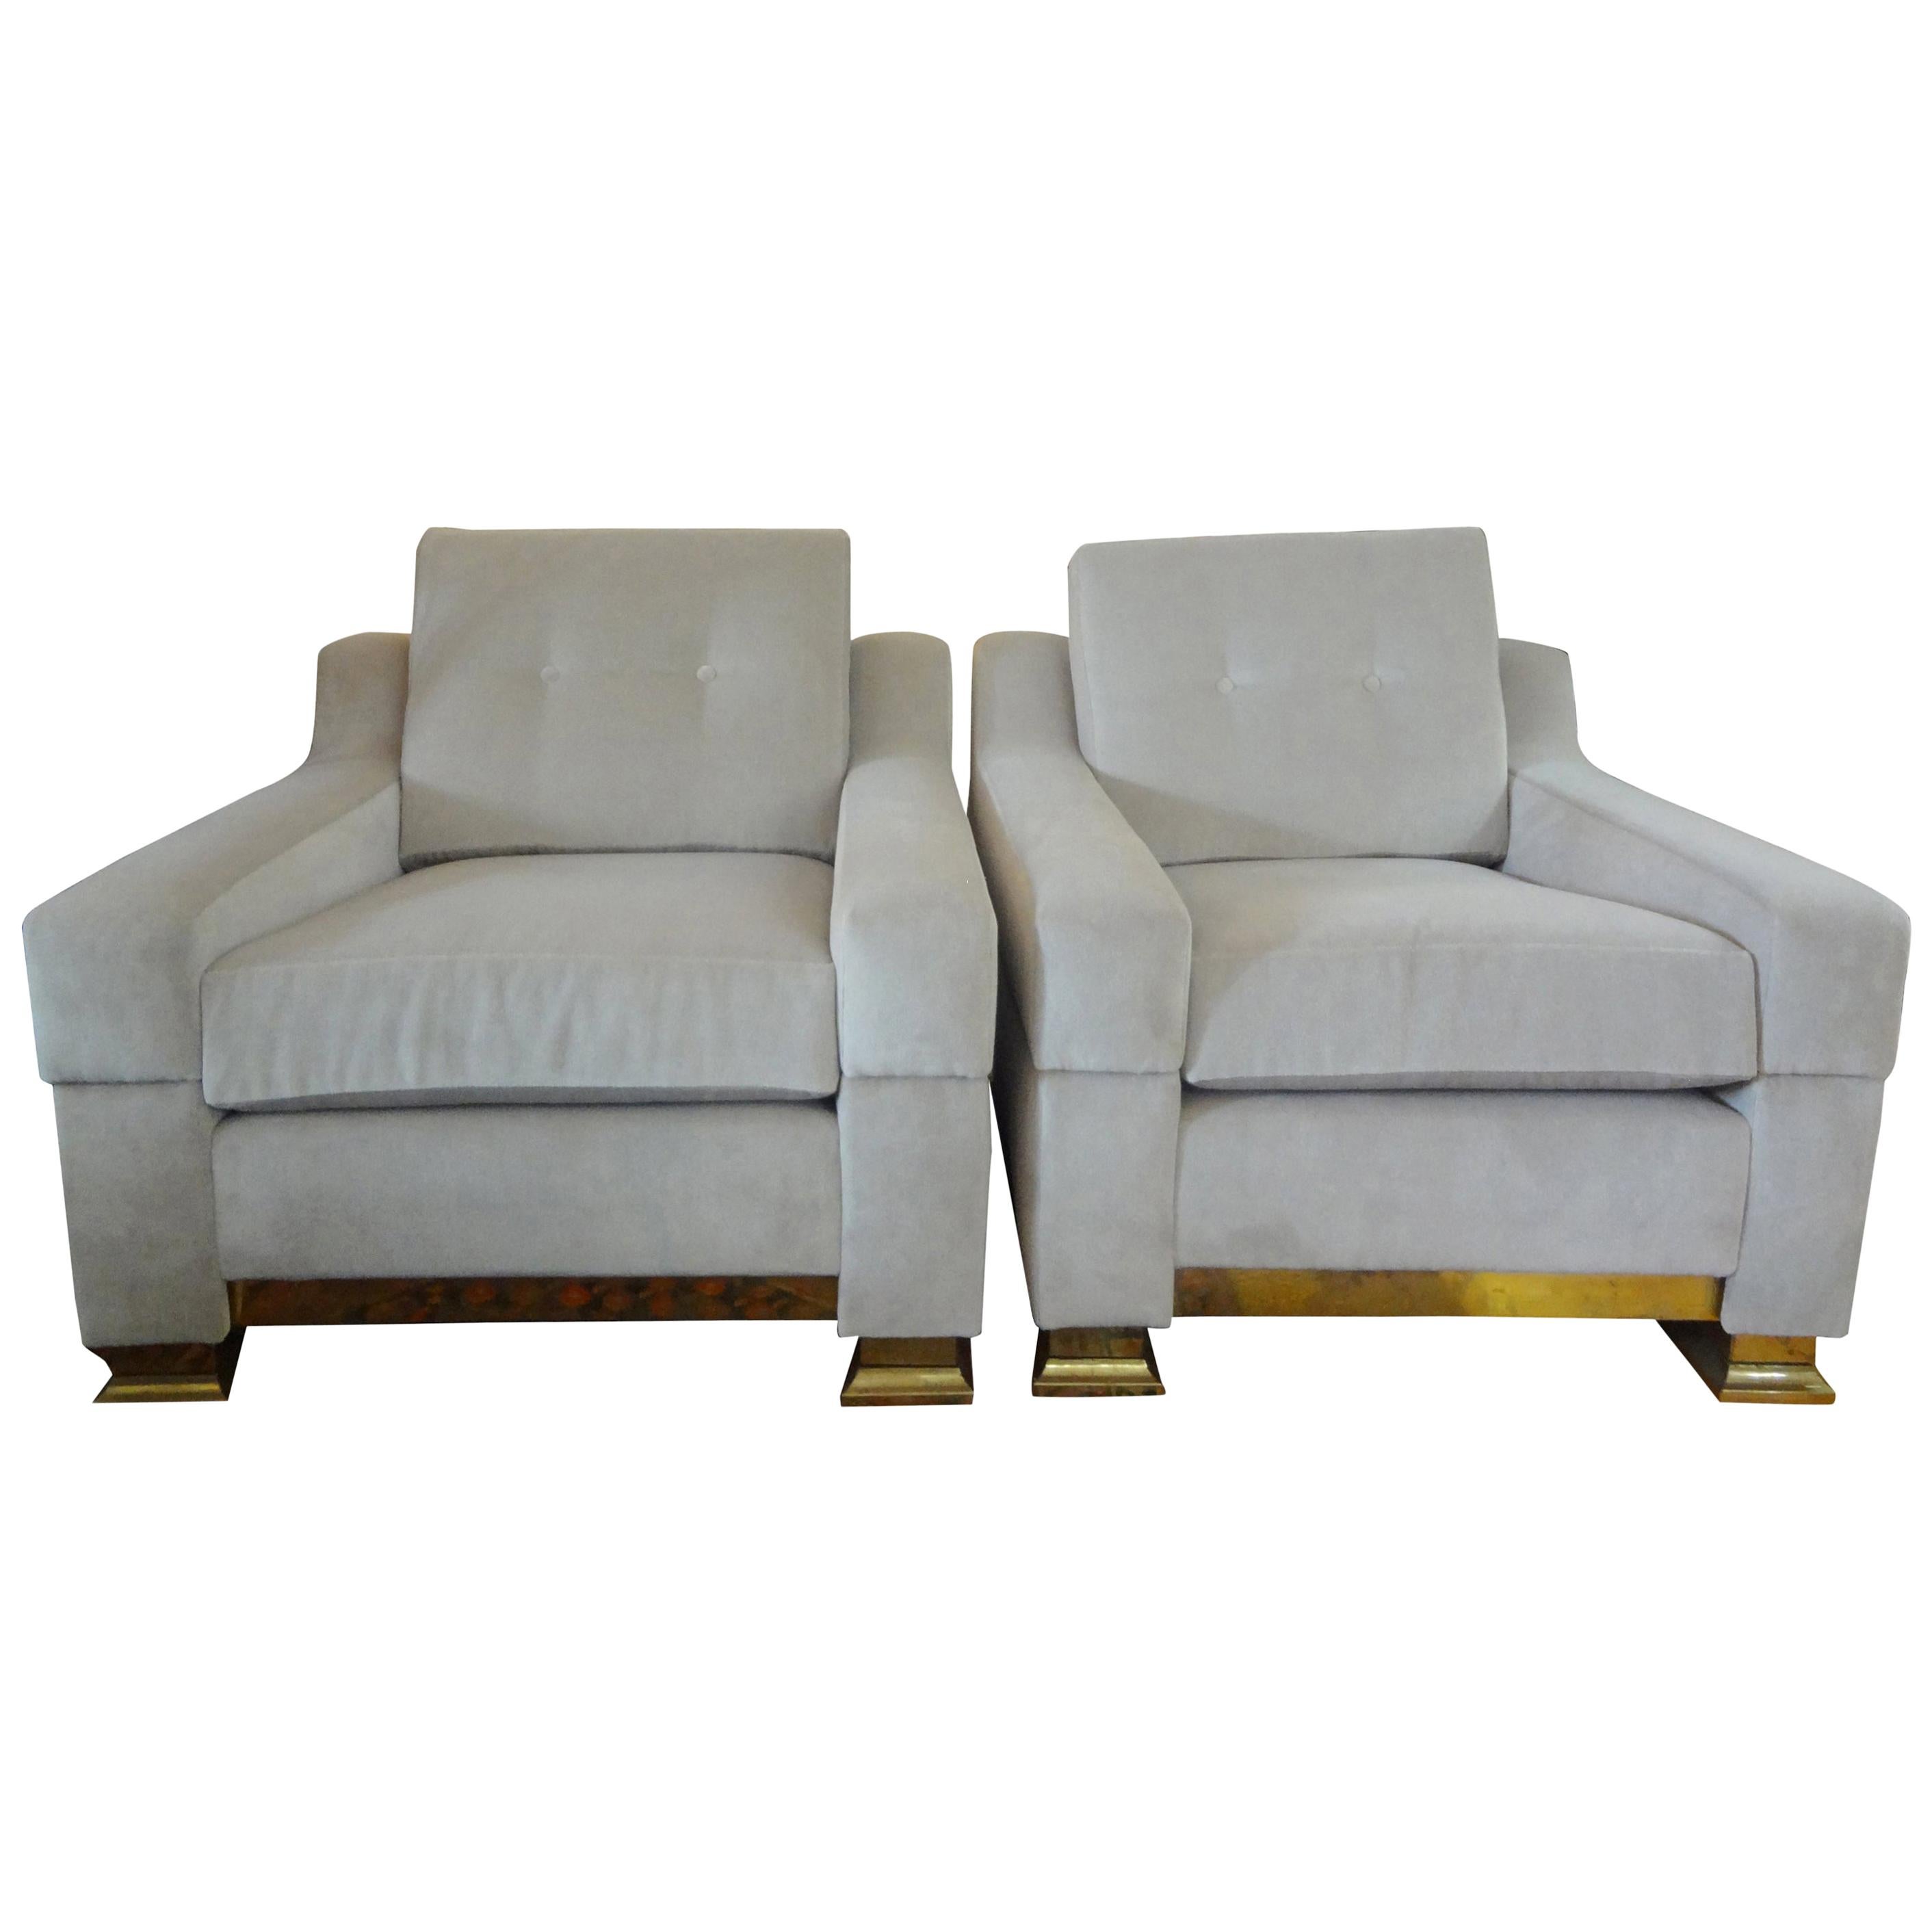 Pair of Italian Modern Cube Chairs with Brass Bases